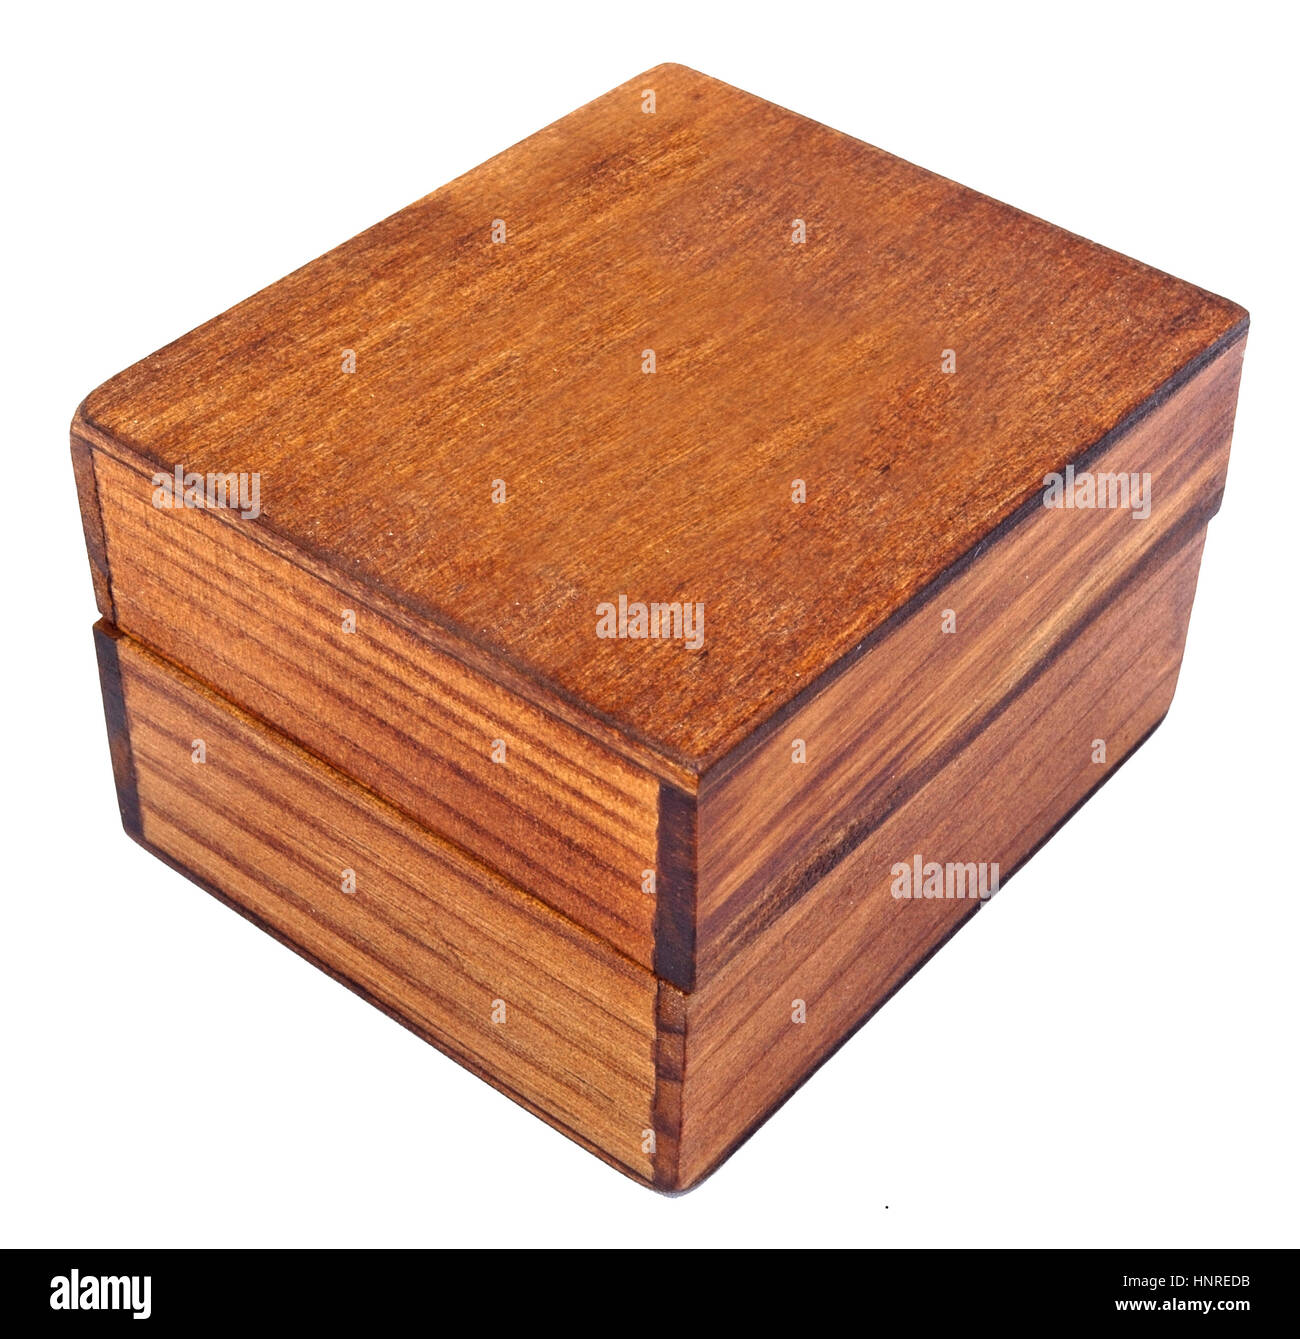 Top and side views of isolated handmade wood box. Stock Photo